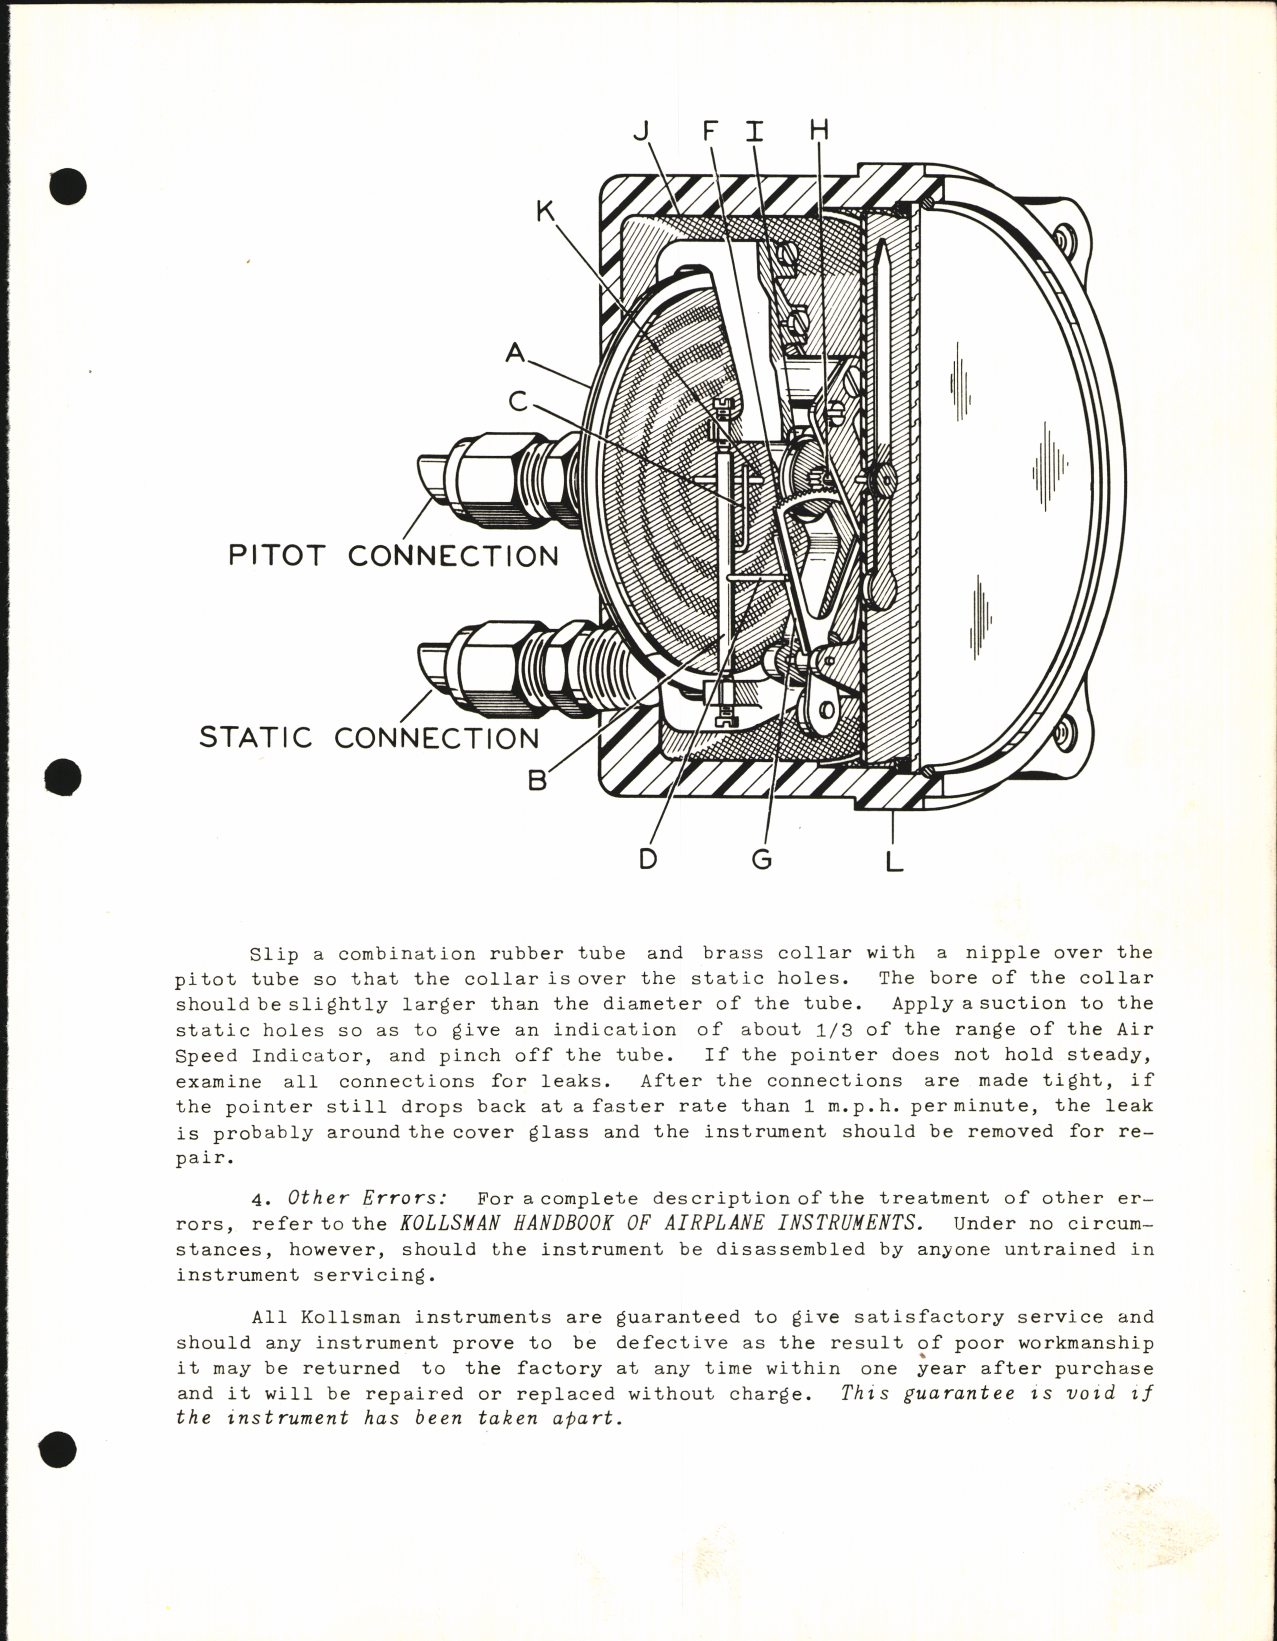 Sample page 5 from AirCorps Library document: Installation Instructions for Kollsman Aircraft Instruments